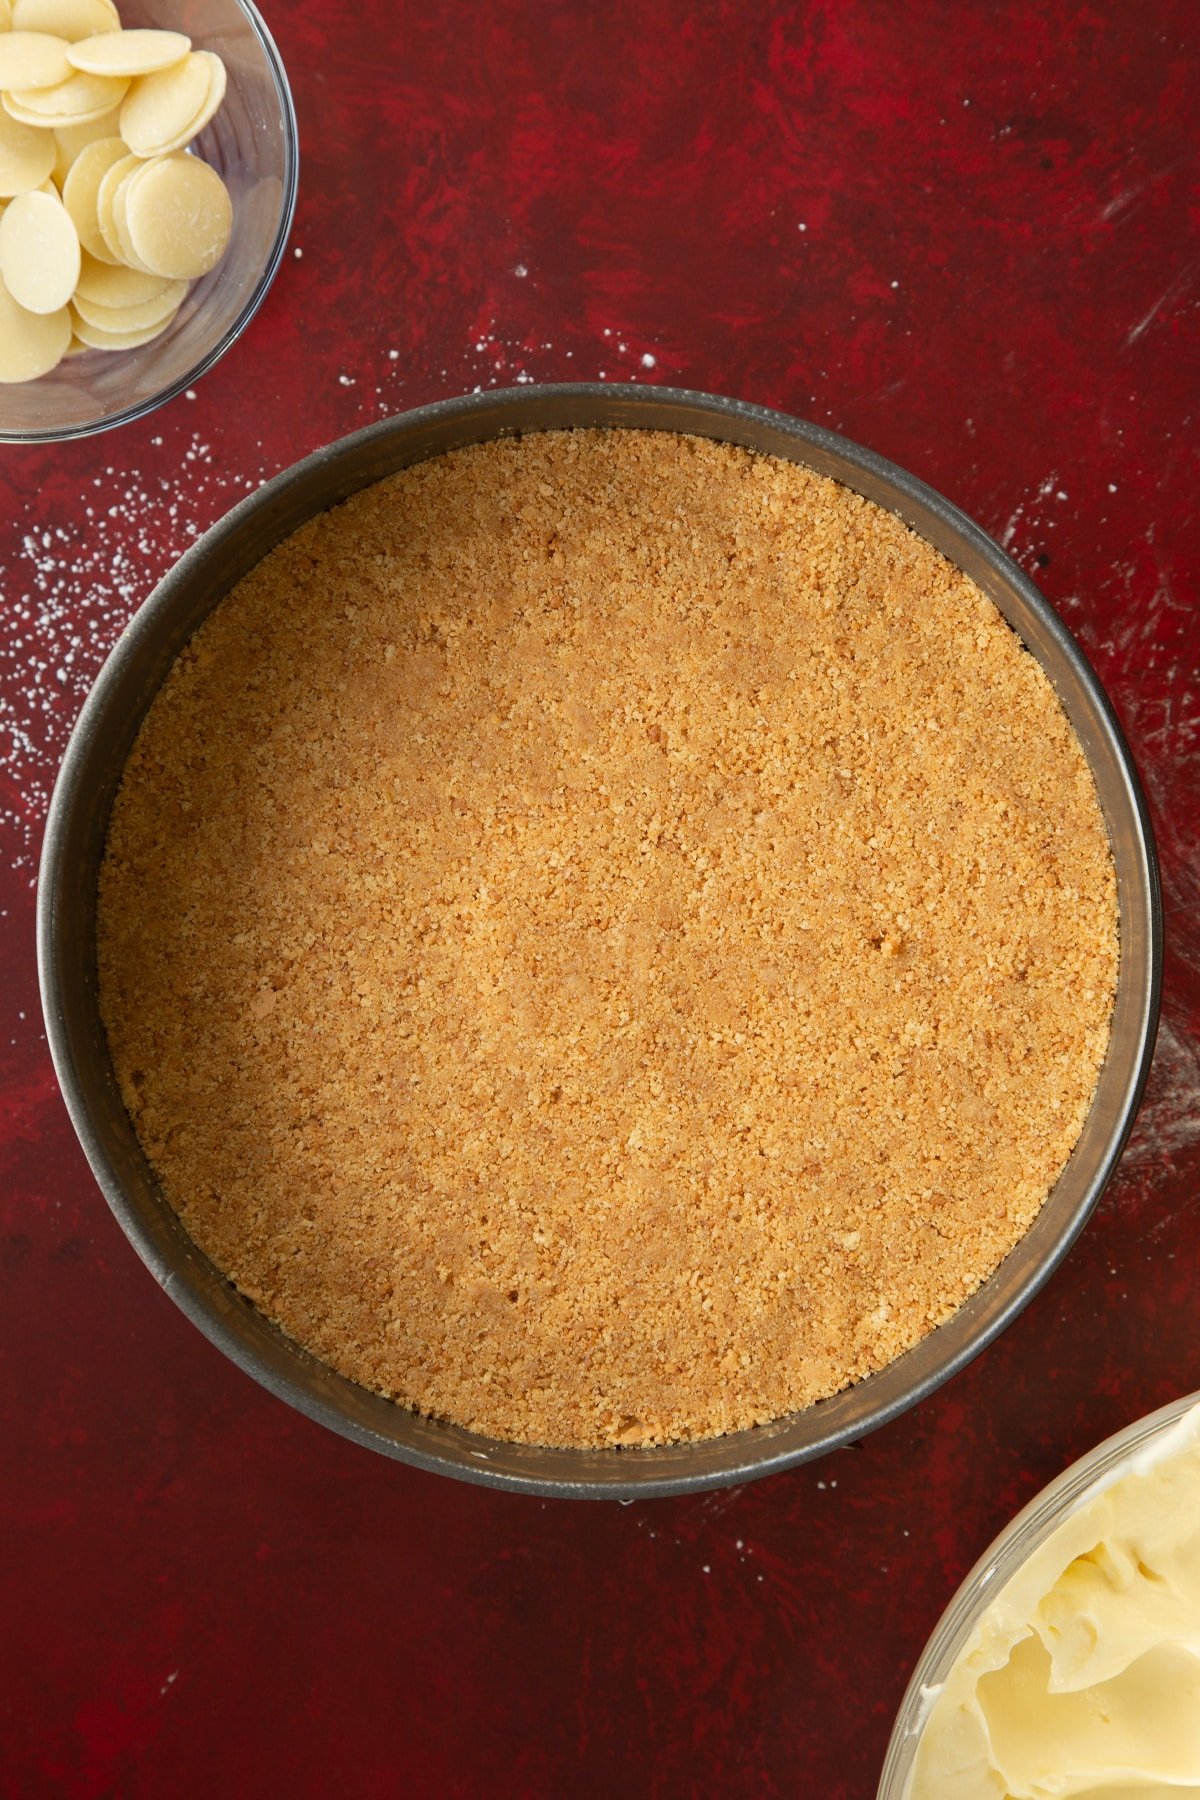 buttery biscuit base pressed down into a round cake tin on a red surface.